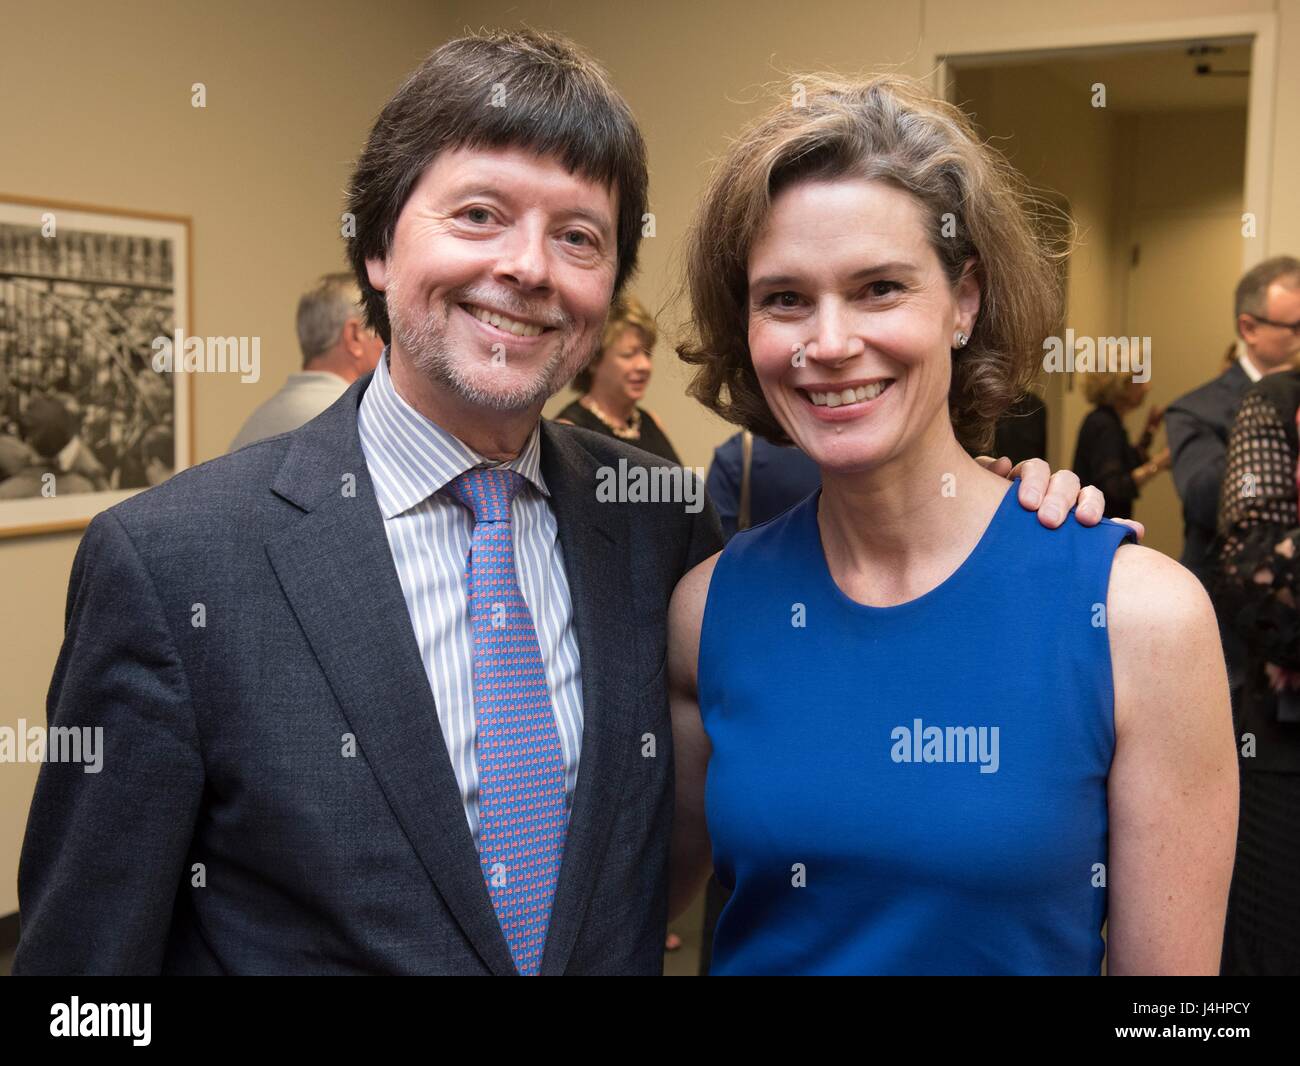 Documentary filmmaker Ken Burns and Bank of America Market President Nikki Graham pose for photos after a screening of the new PBS documentary The Vietnam War at the LBJ Presidential Library April 27, 2017 in Austin, Texas.     (photo by Jay Godwin/LBJ Presidential Library  via Planetpix) Stock Photo